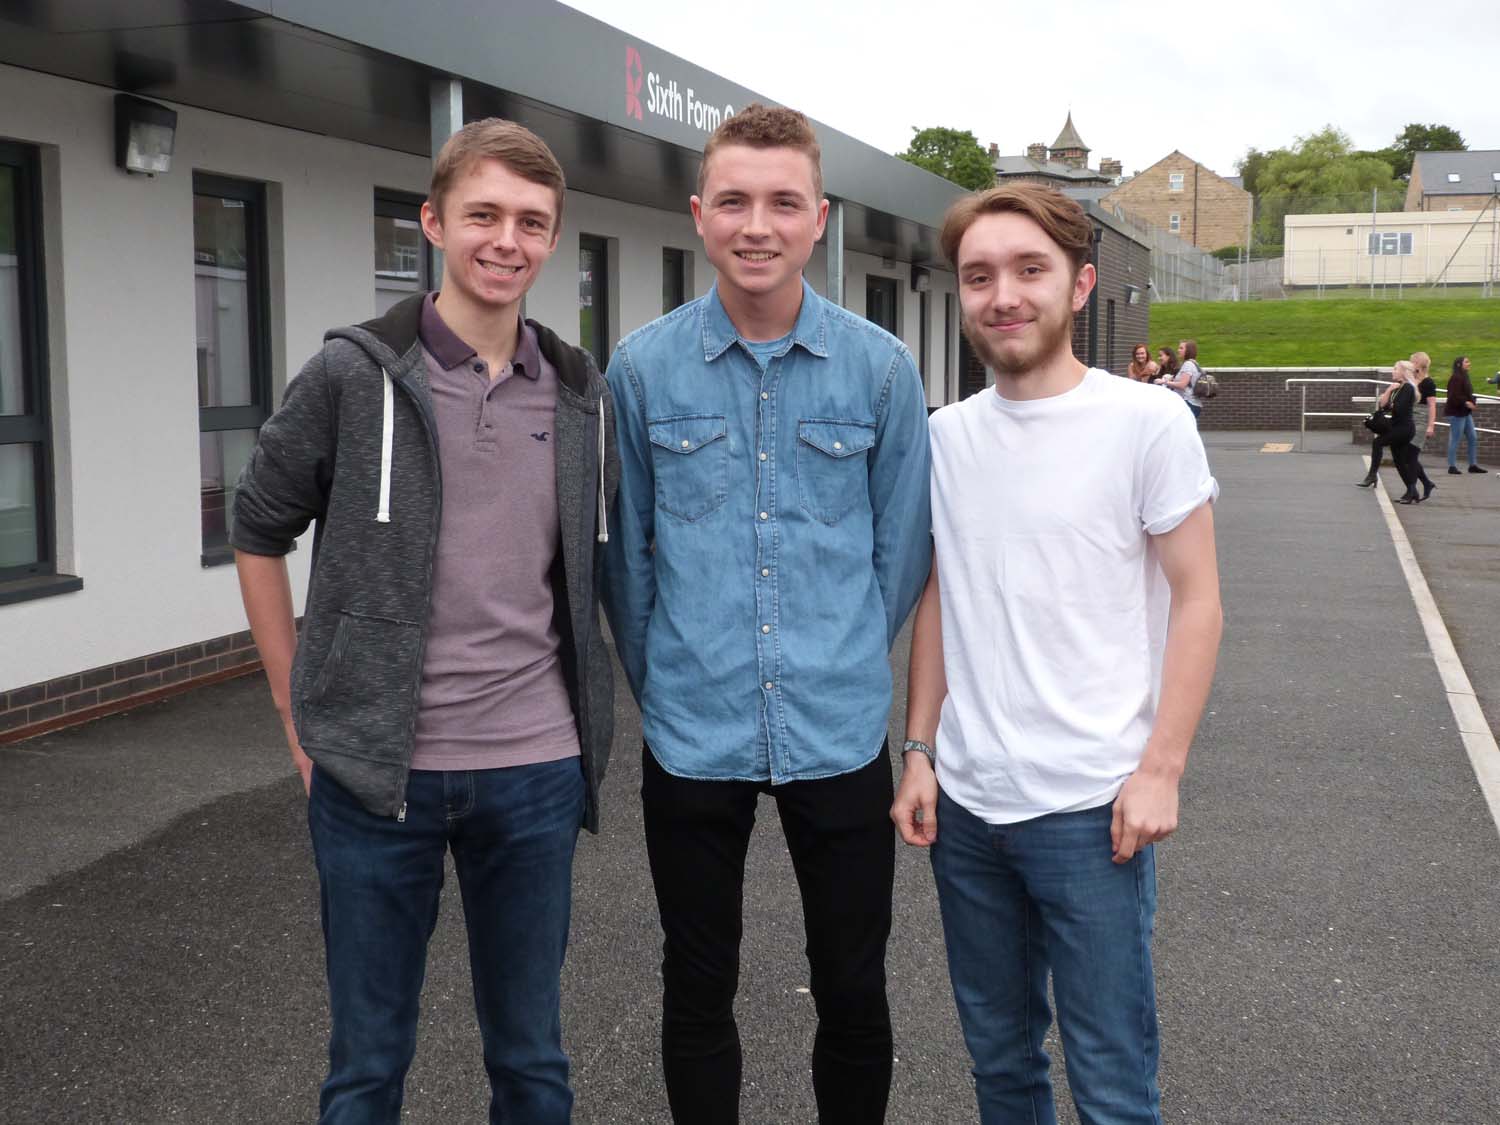 Matthew Petty (AAB) will be studying Maths and Economics at Newcastle University, while Jamie Blundell (BBC) and Jamie Shakespeare (ACC) will both study Civil Engineering, at Liverpool and Salford respectively